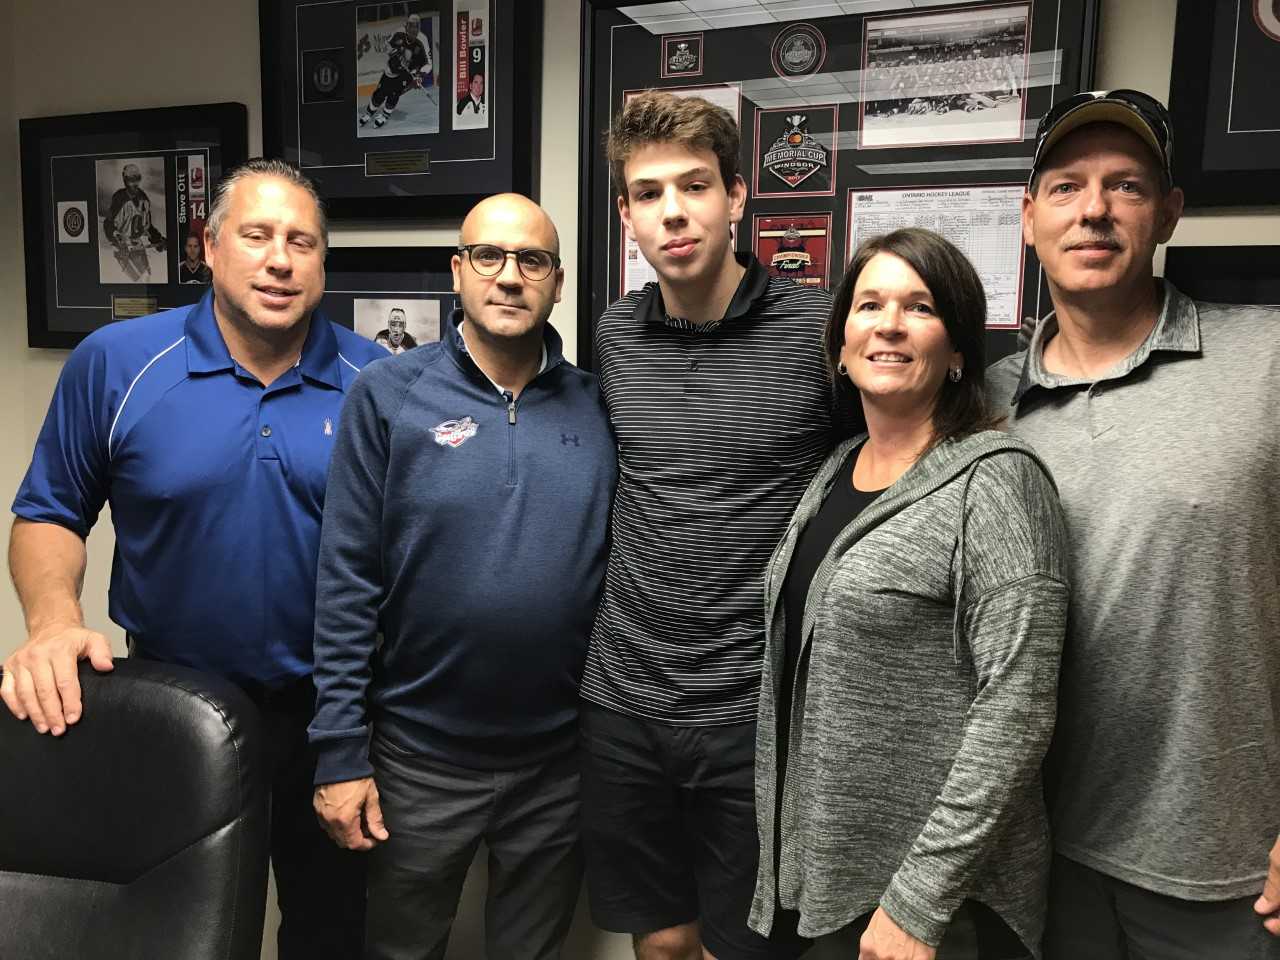 First-round pick commits to Windsor Spitfires